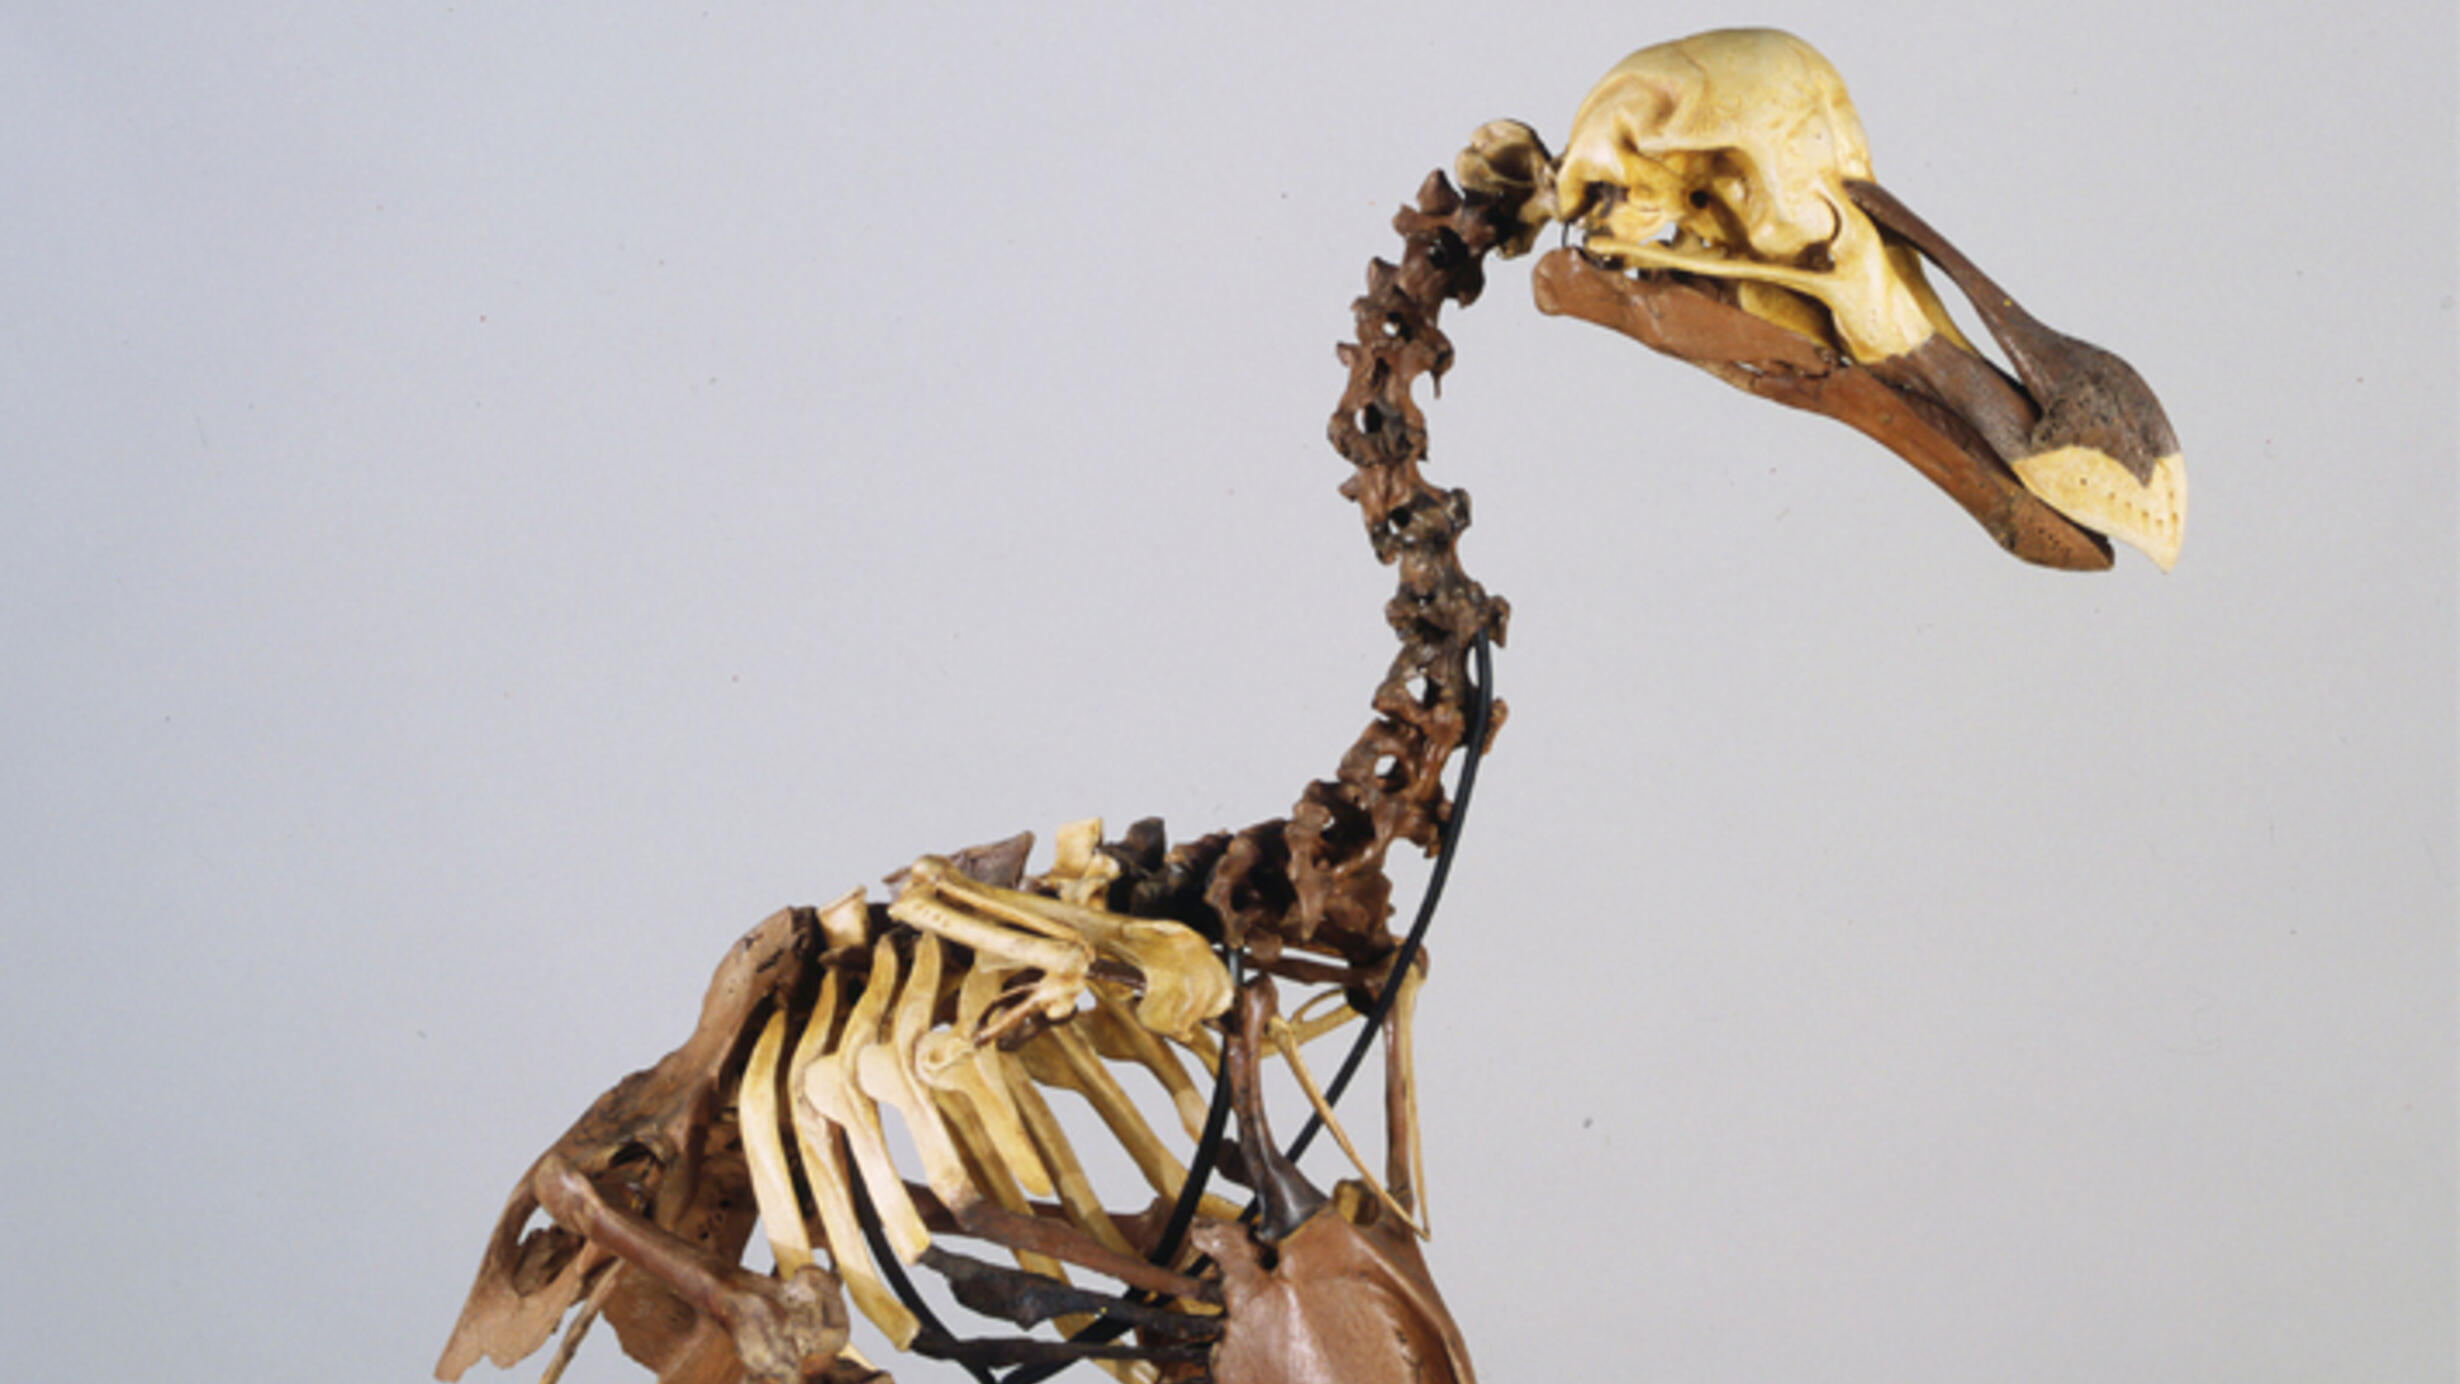 A skeleton specimen of a Dodo bird shows the curve of its neck and spine and its rounded bill.